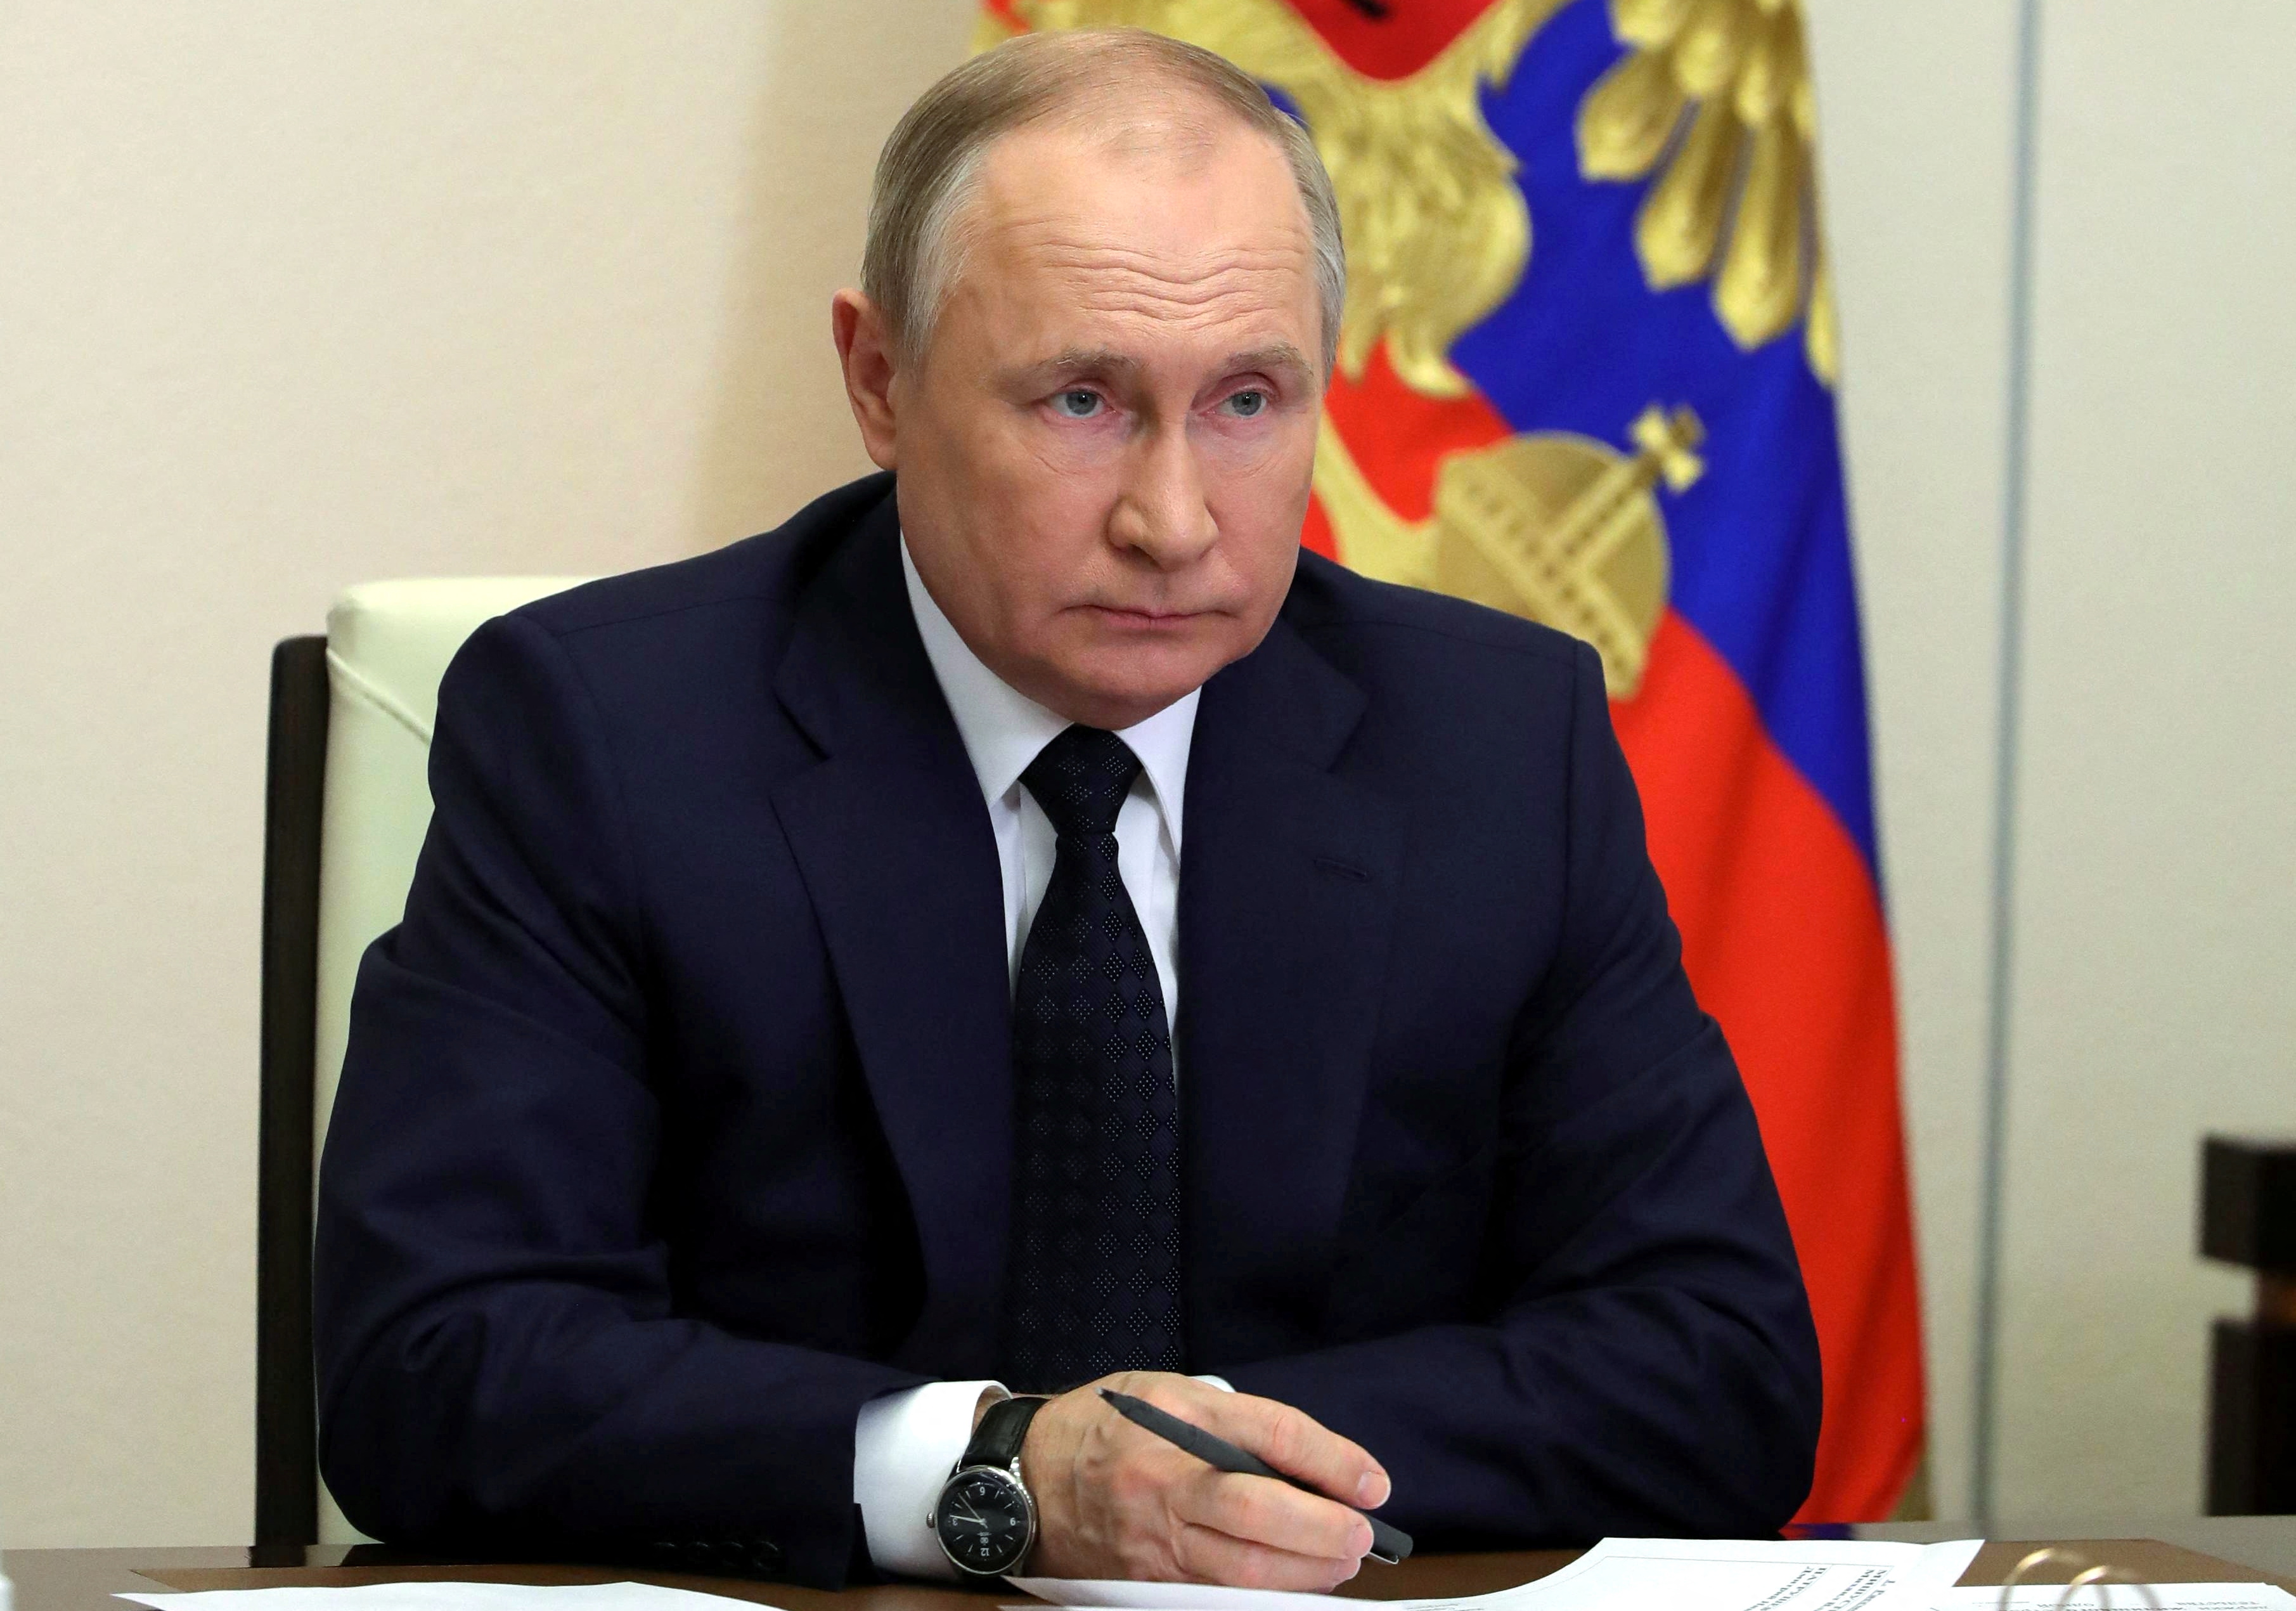 putin says russia will enforce rouble payments for gas from friday | reuters